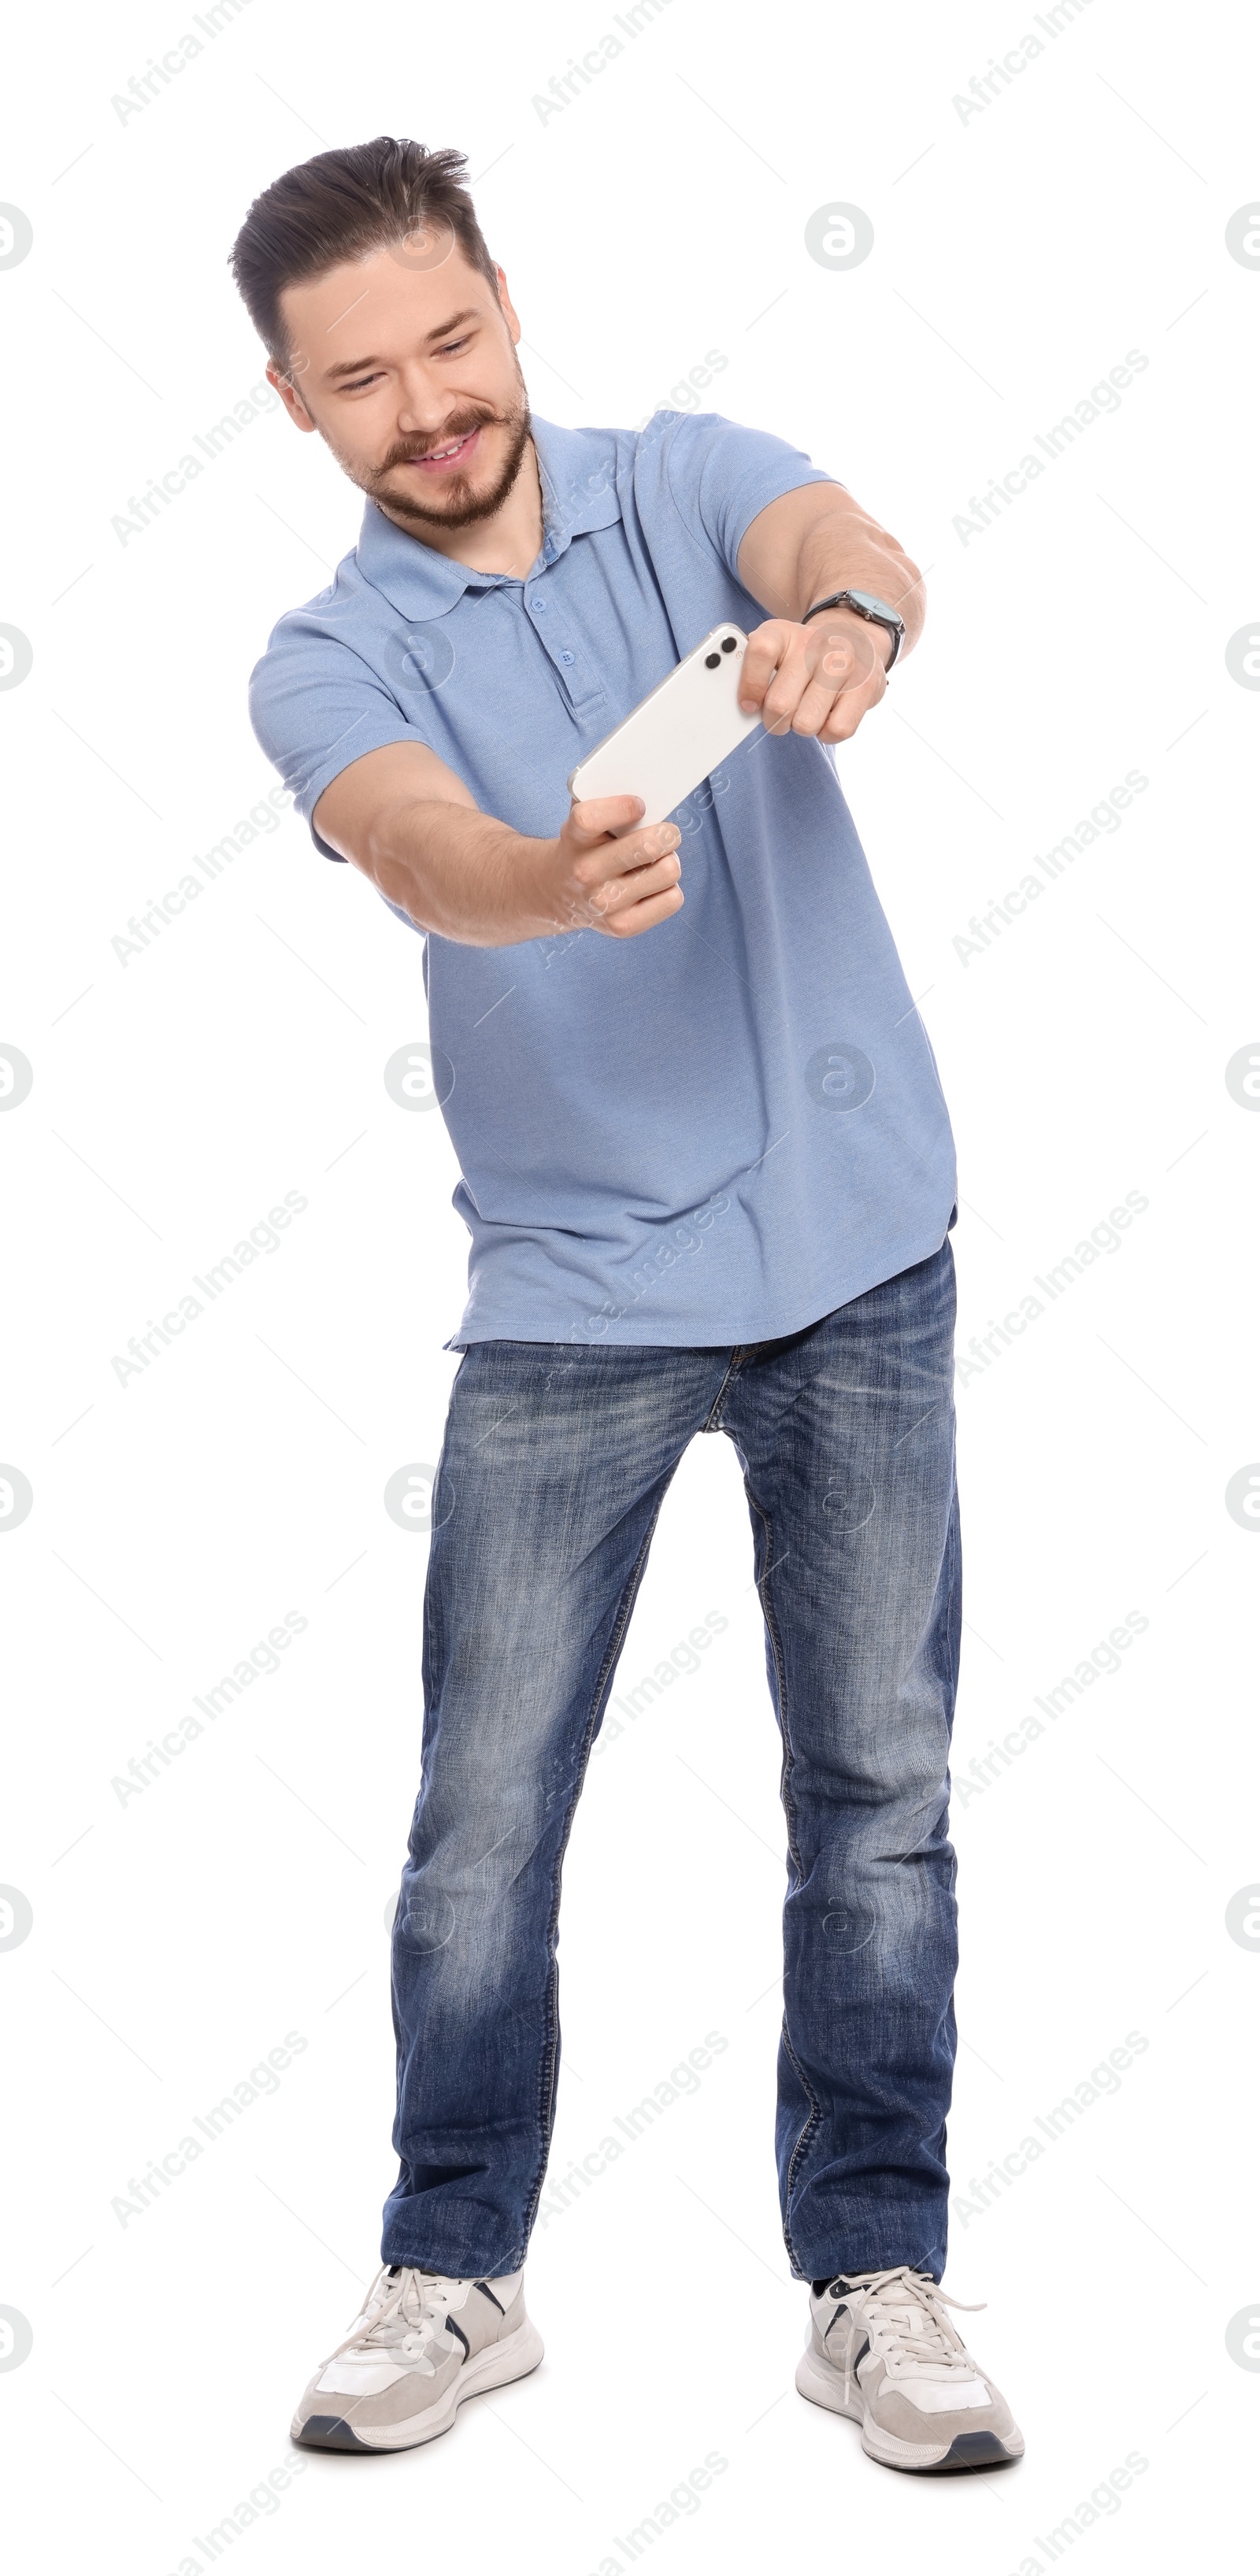 Photo of Happy man playing game on phone against white background